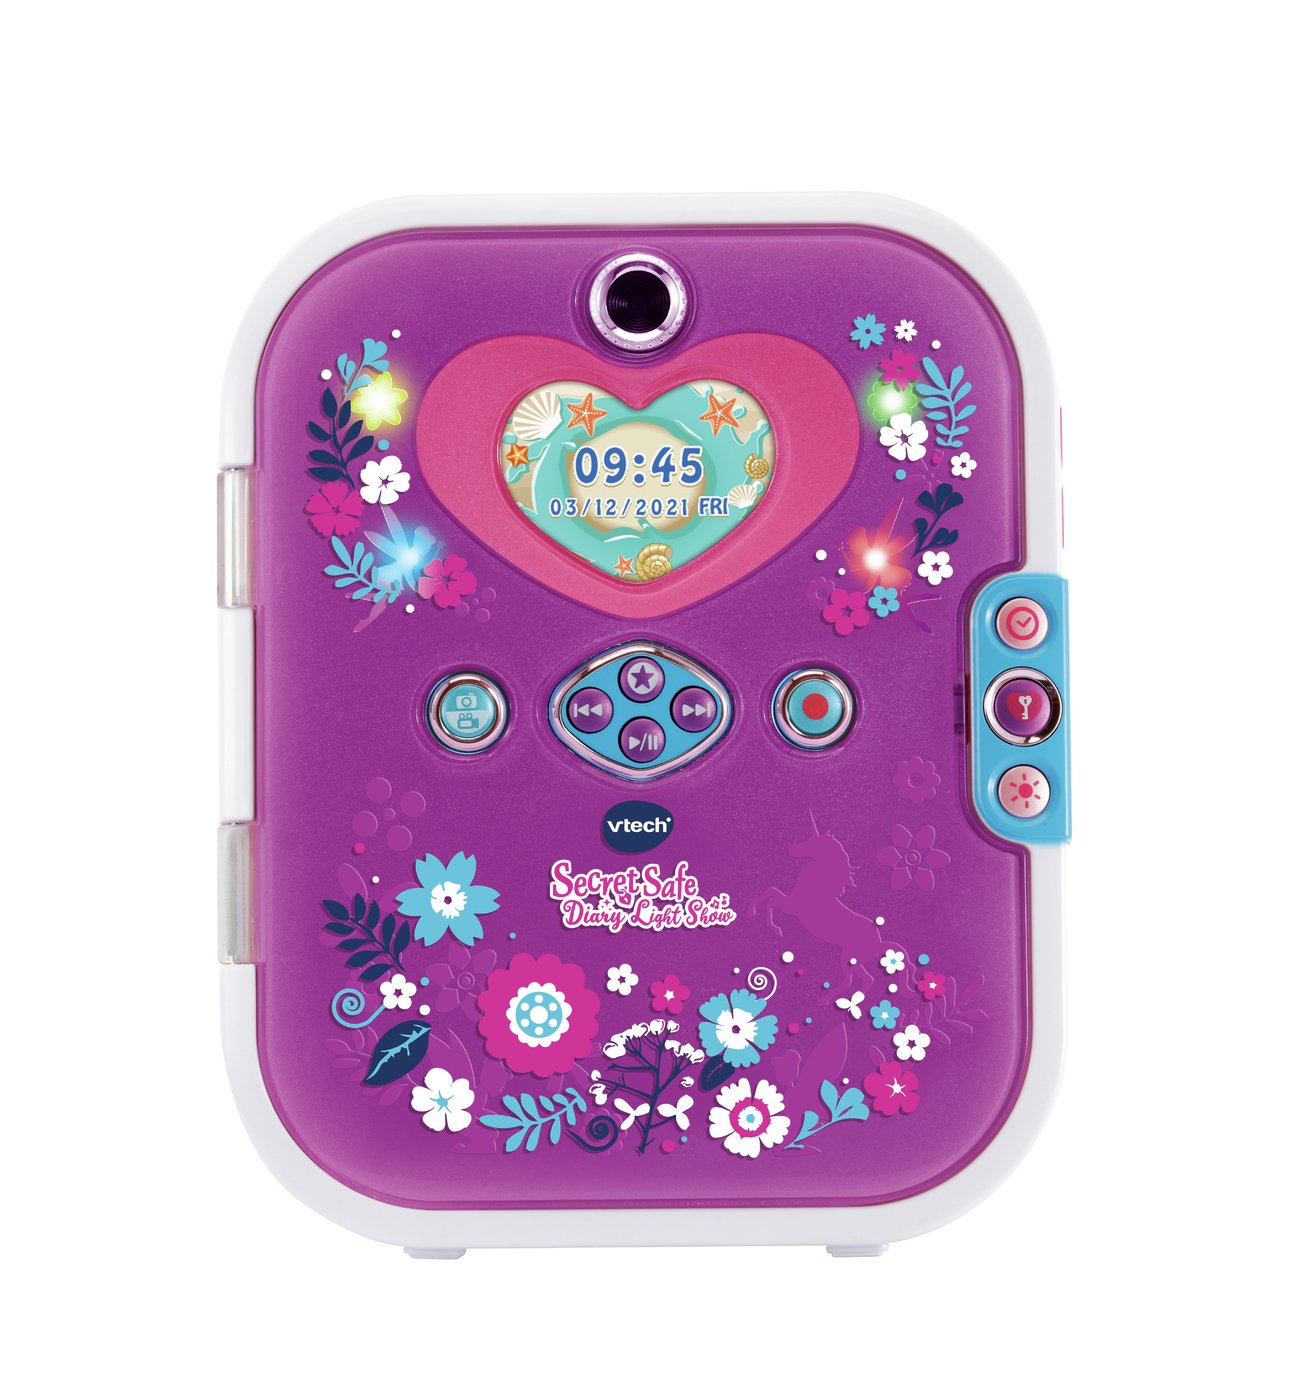 Buy Vtech Secret Safe Diary Light Show, Electronic diaries and journals